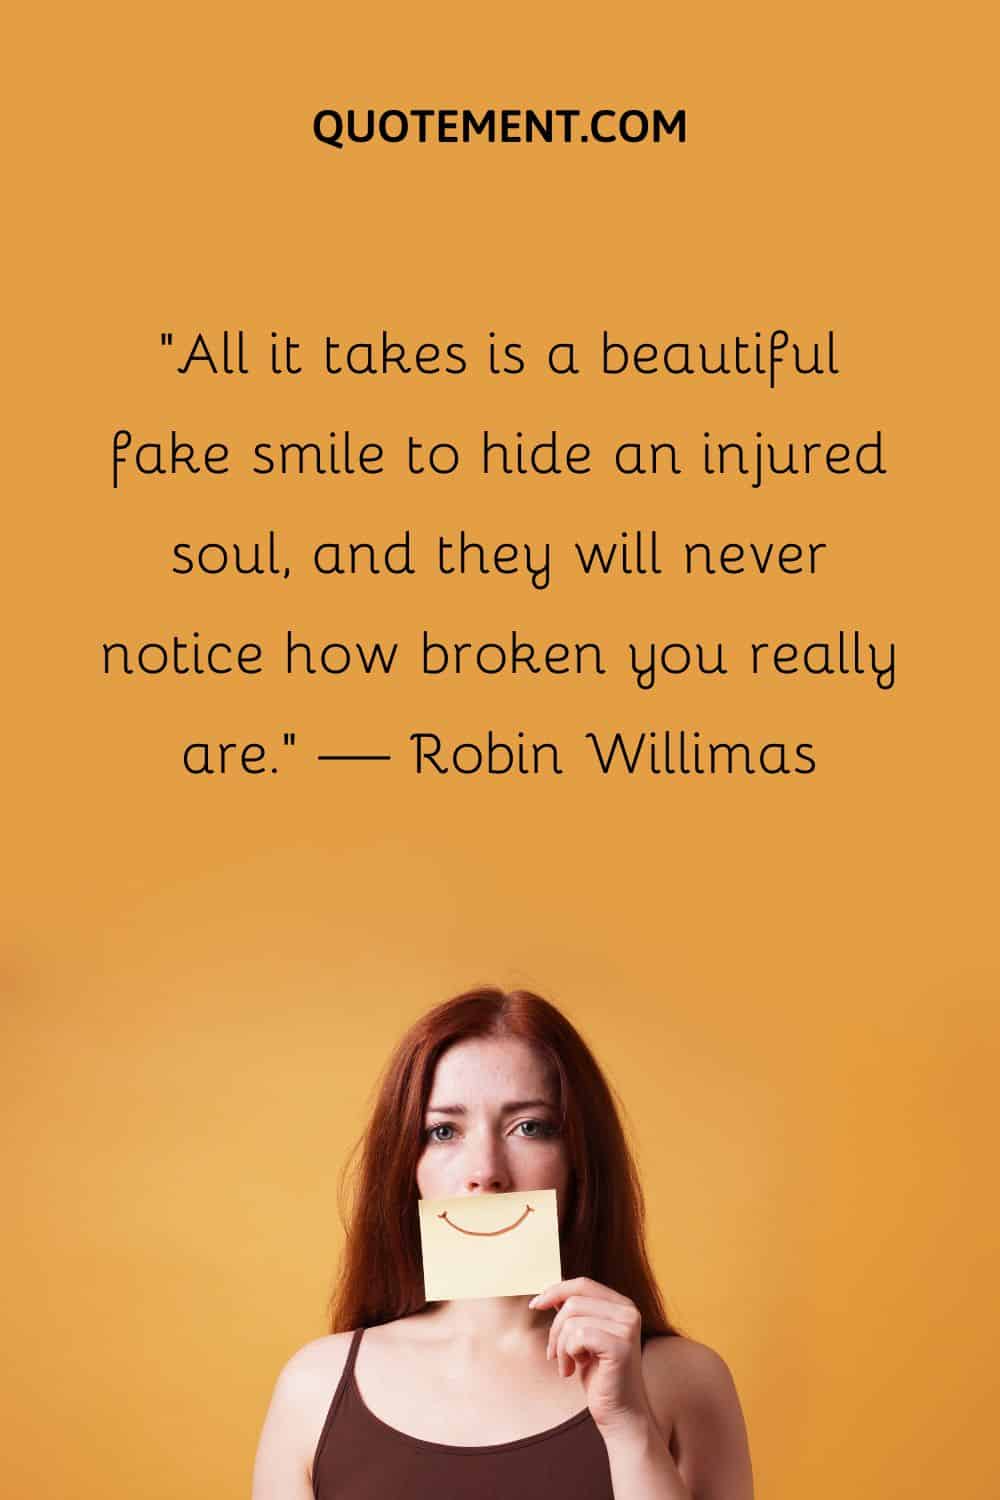 170 Most Inspiring Quotes About Smiling Through Pain